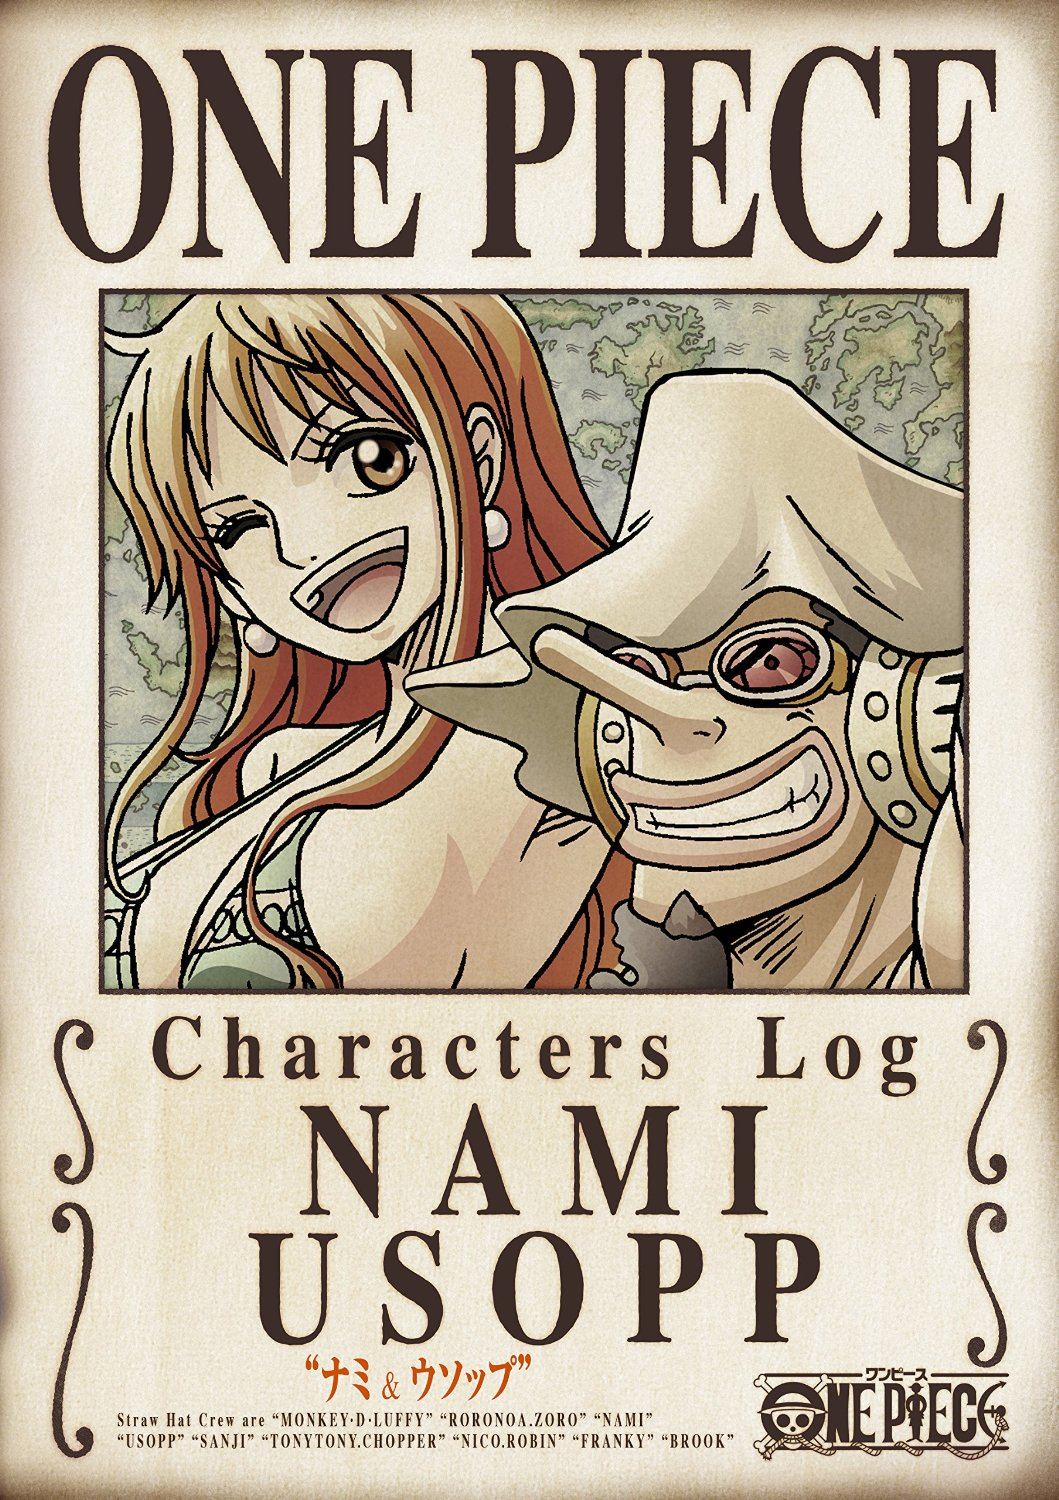 One Piece Characters Log - Luffy And Zoro